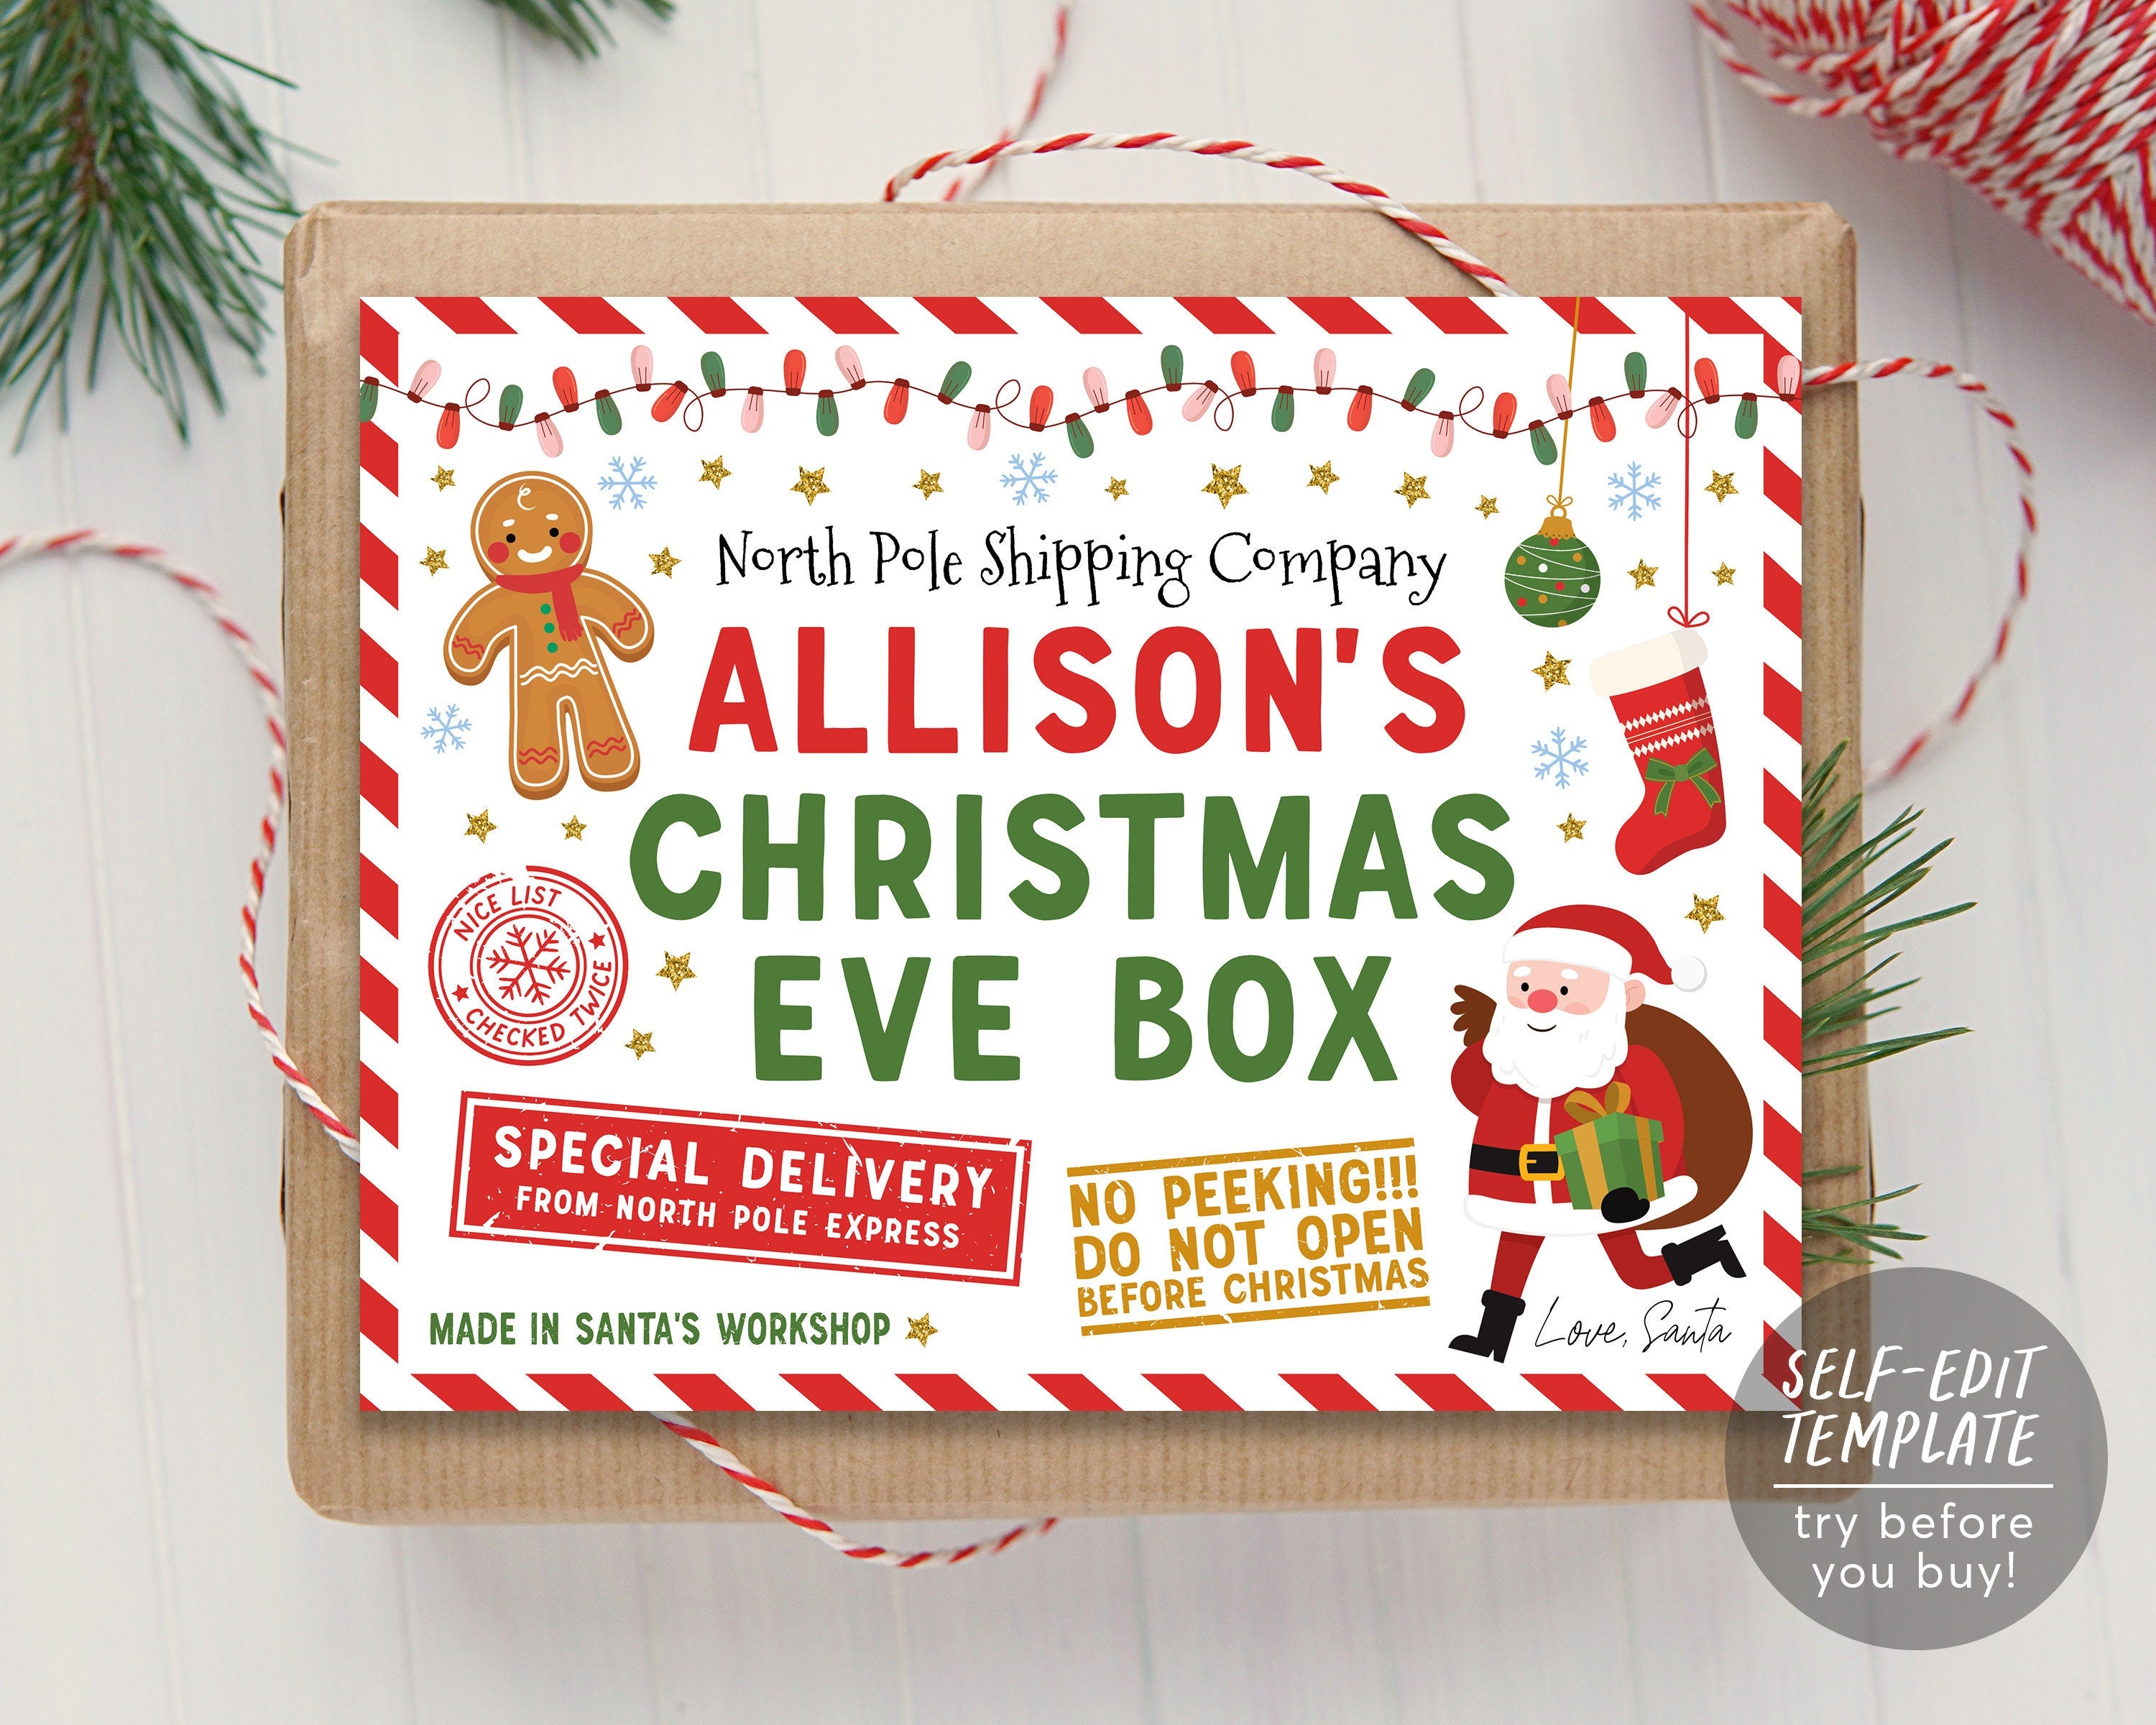 christmas-eve-box-label-editable-template-xmas-eve-crate-label-specia